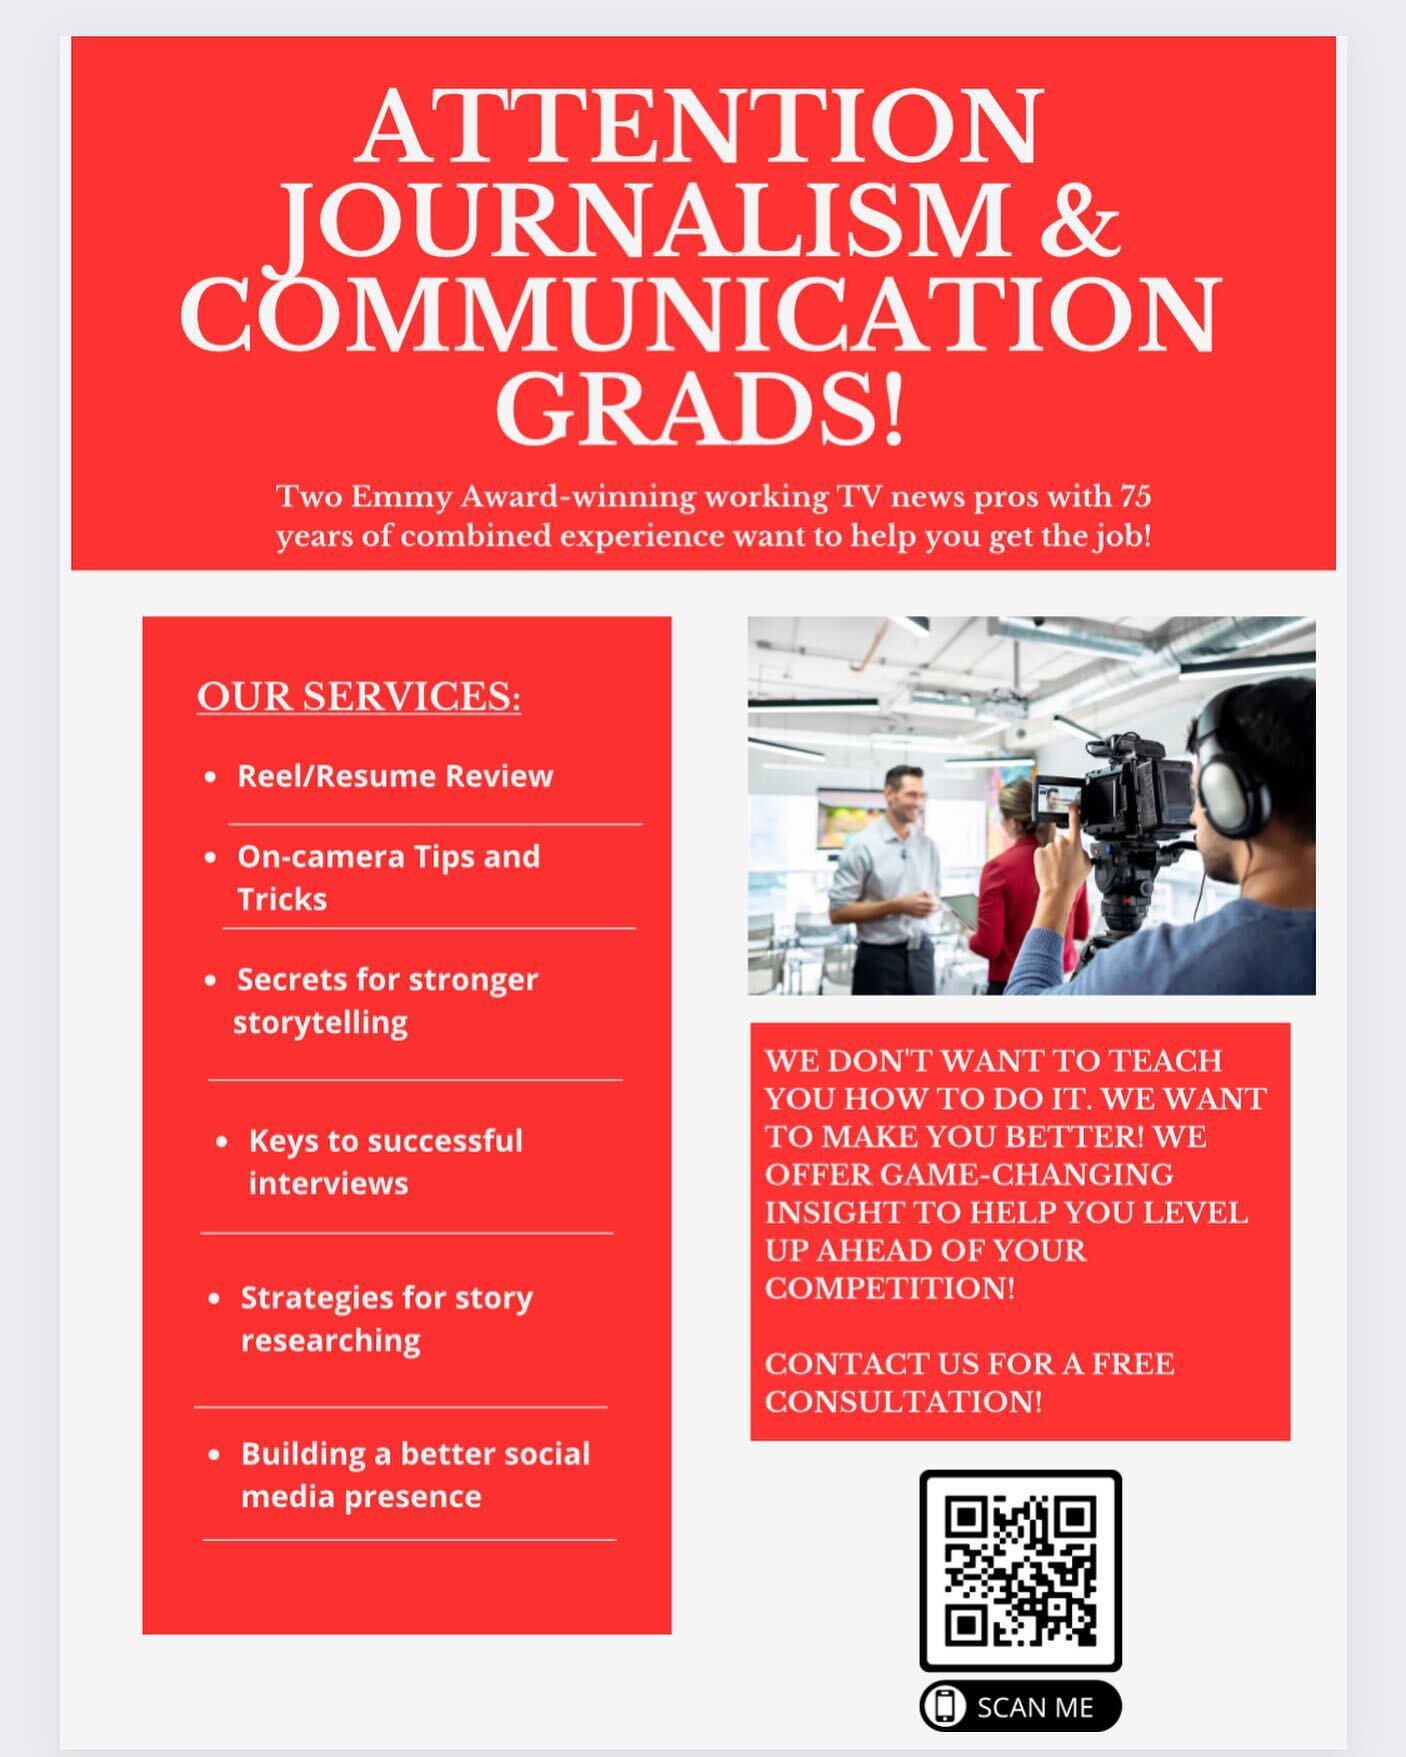 ATTENTION NEW JOURNALISM &amp; COMMUNICATION GRADS! 
Let us help you land that job! 
We don&rsquo;t want to teach you how to do it&hellip; We want to make you better!!! Contact us! 

#tvnews 
#mediaarts
#journalism 
#youtubers 
#broadcastjournalism